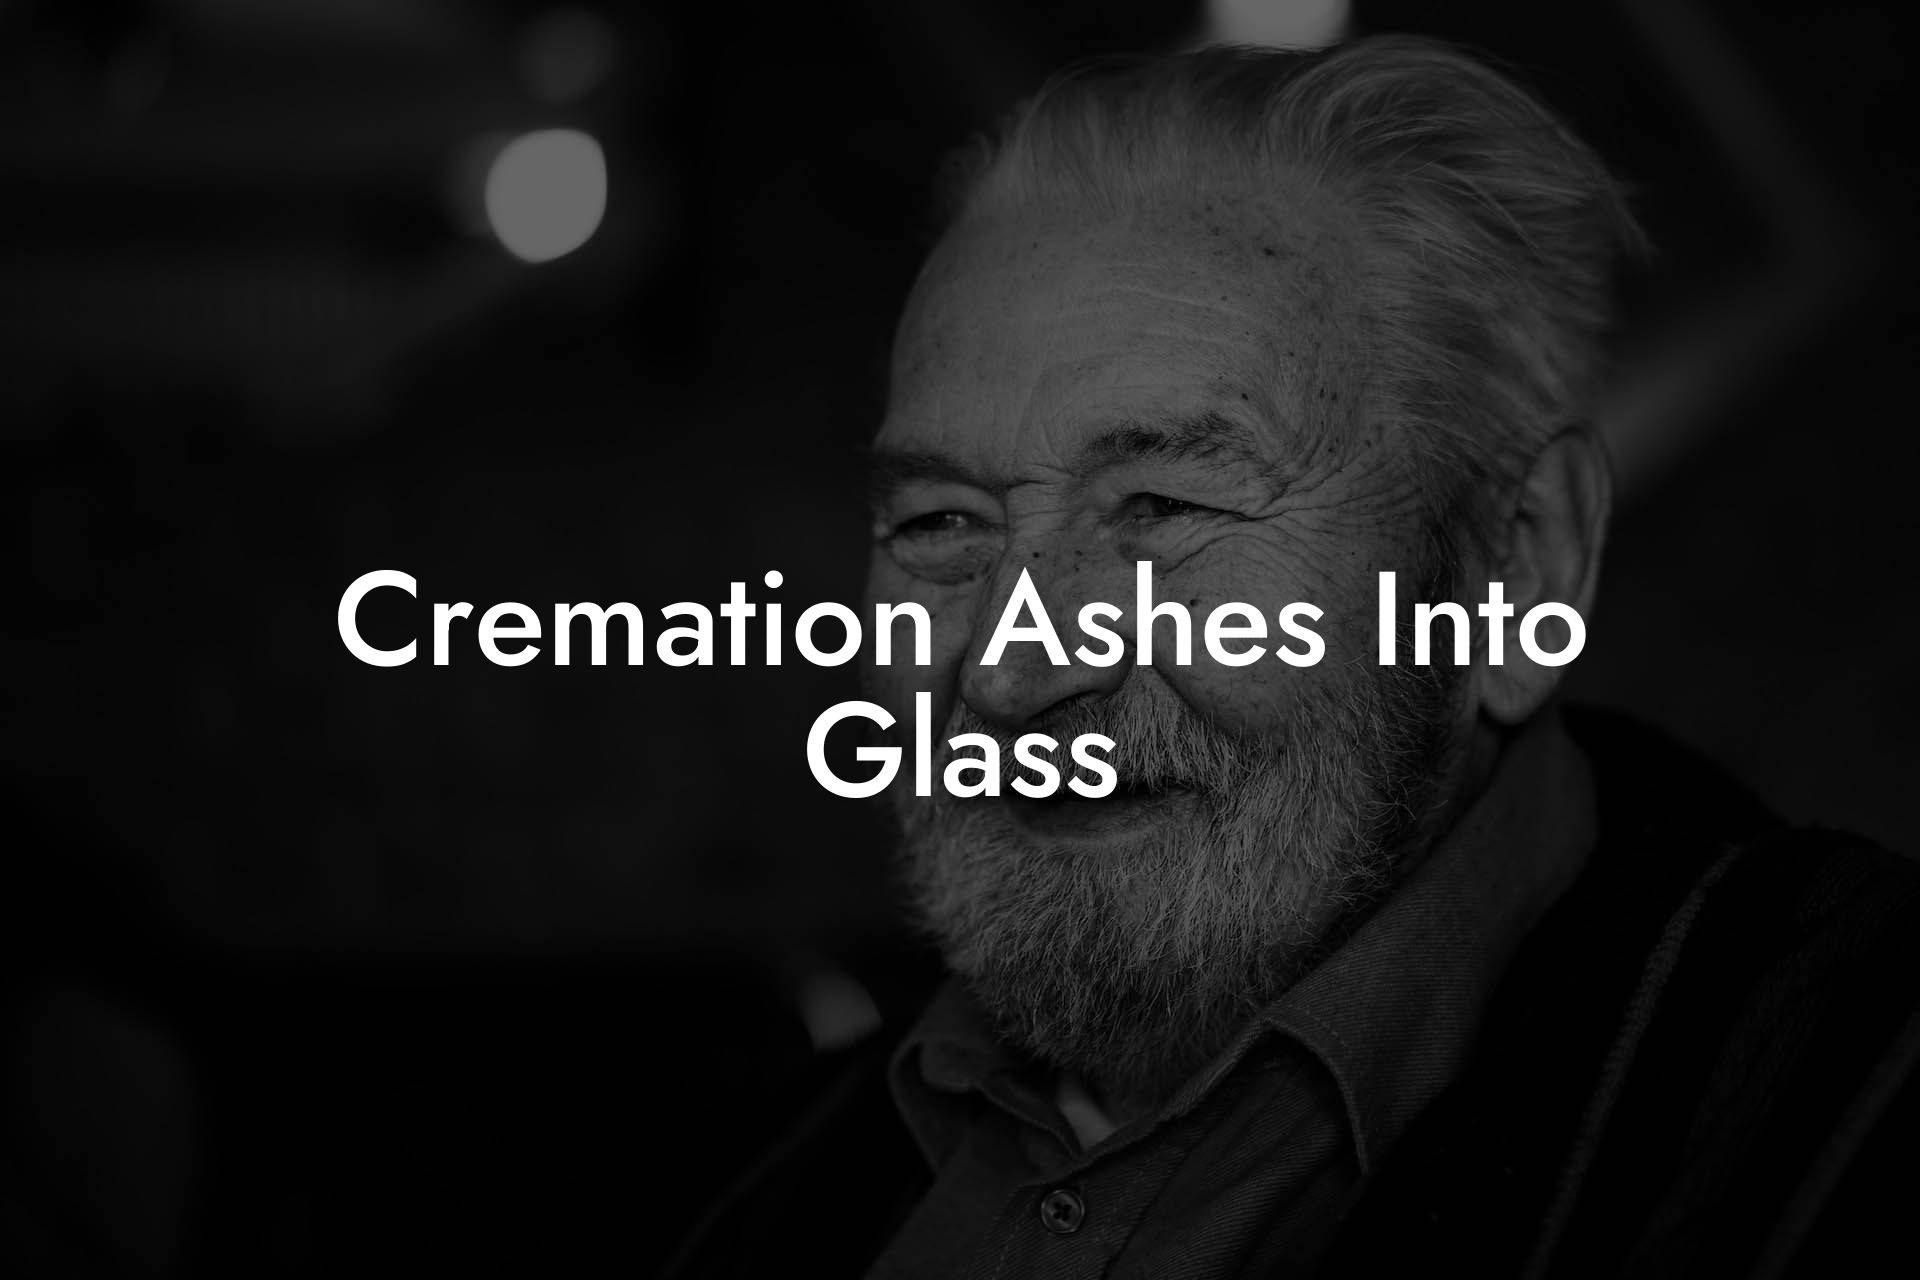 Cremation Ashes Into Glass